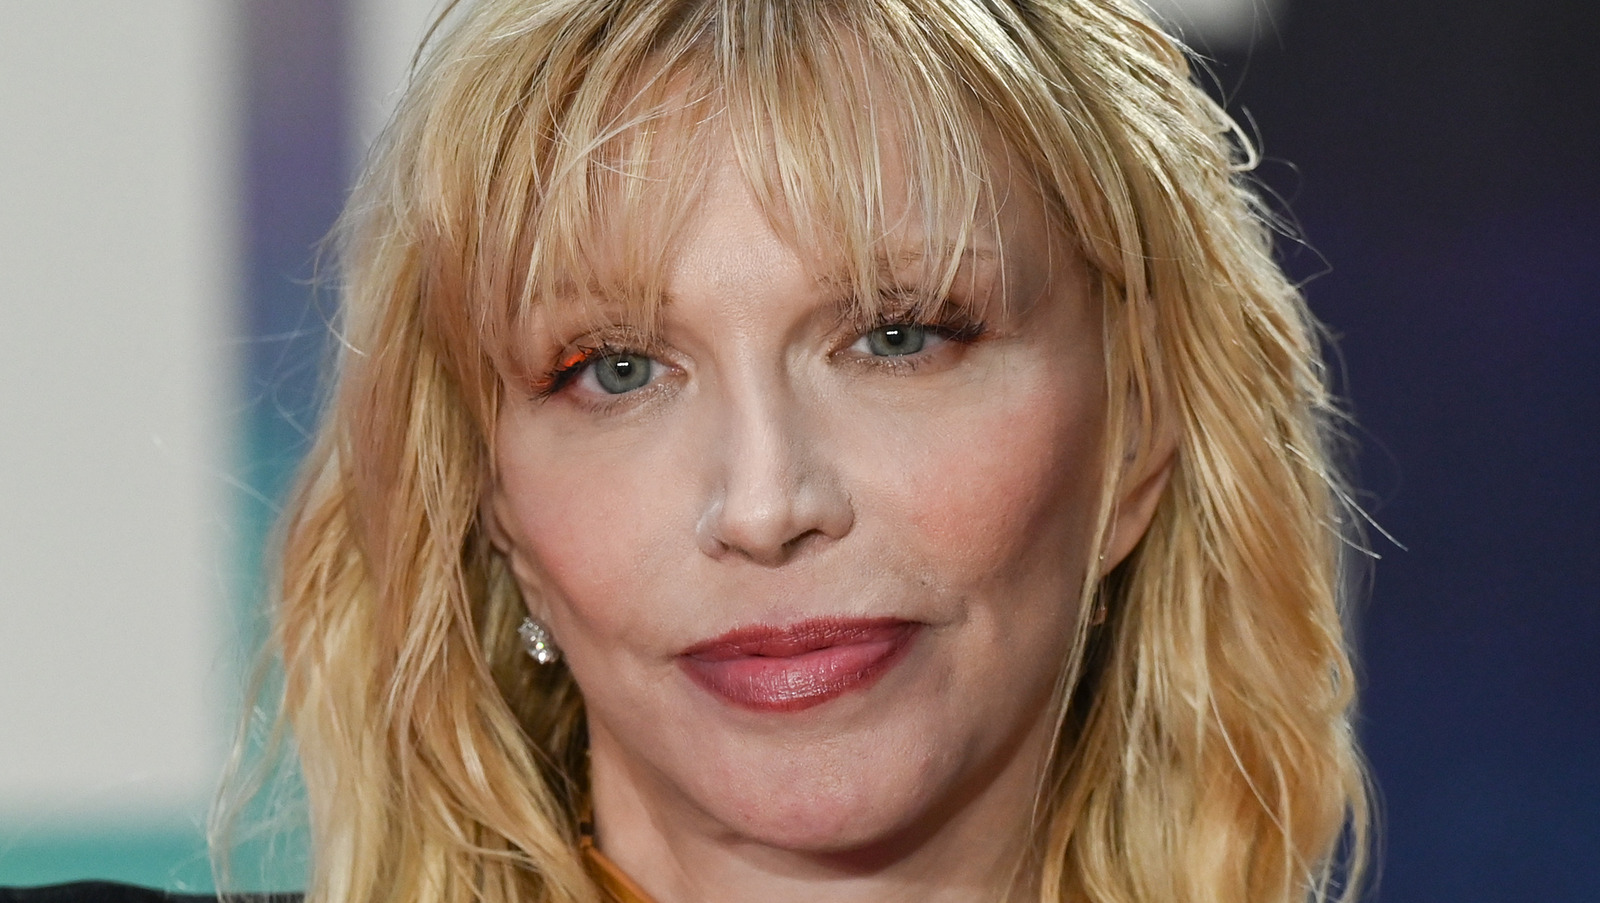 2. How to Achieve Courtney Love's Signature Blonde Hair - wide 1